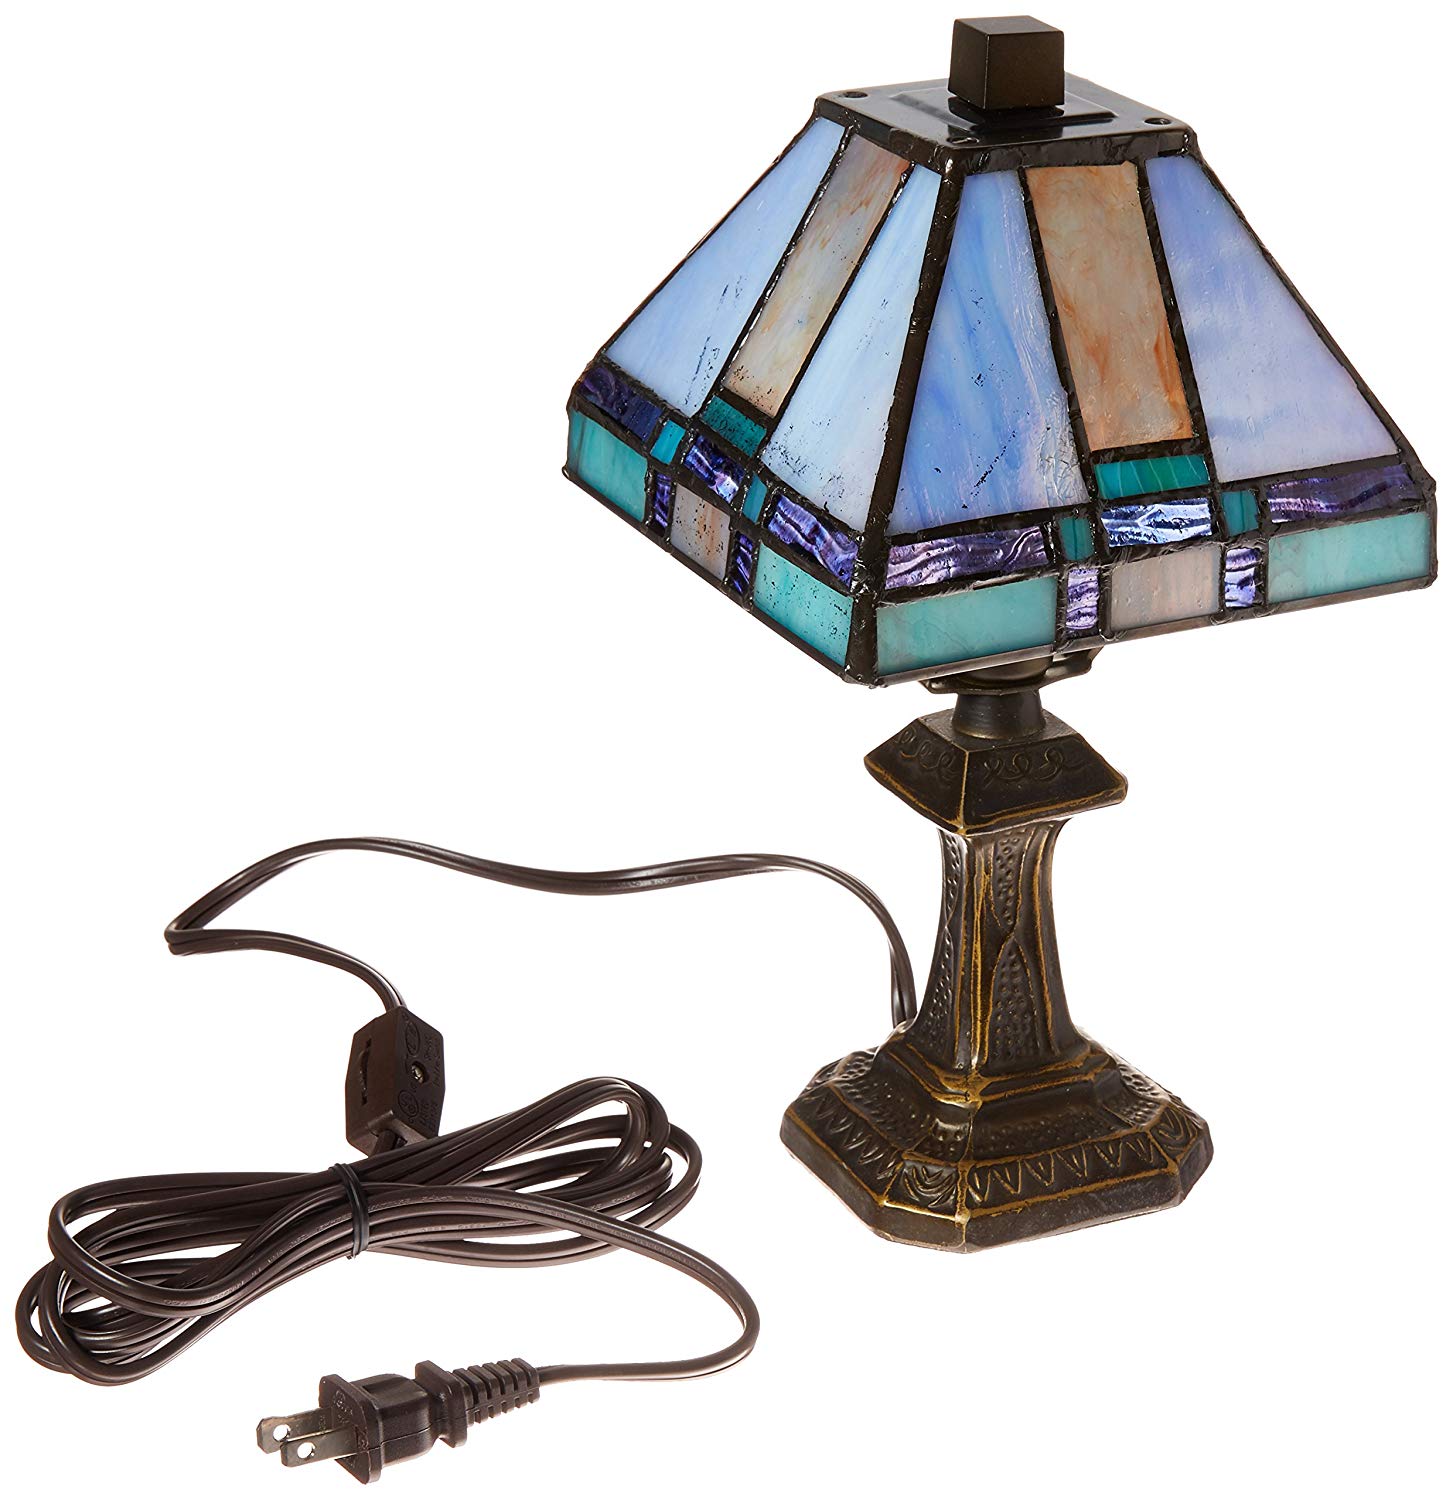 dale tiffany tranquility mission mini table lamp antique brass accent lamps and art glass shade nautical kitchen side designs hollywood mirror cabinet outdoor wicker coffee with